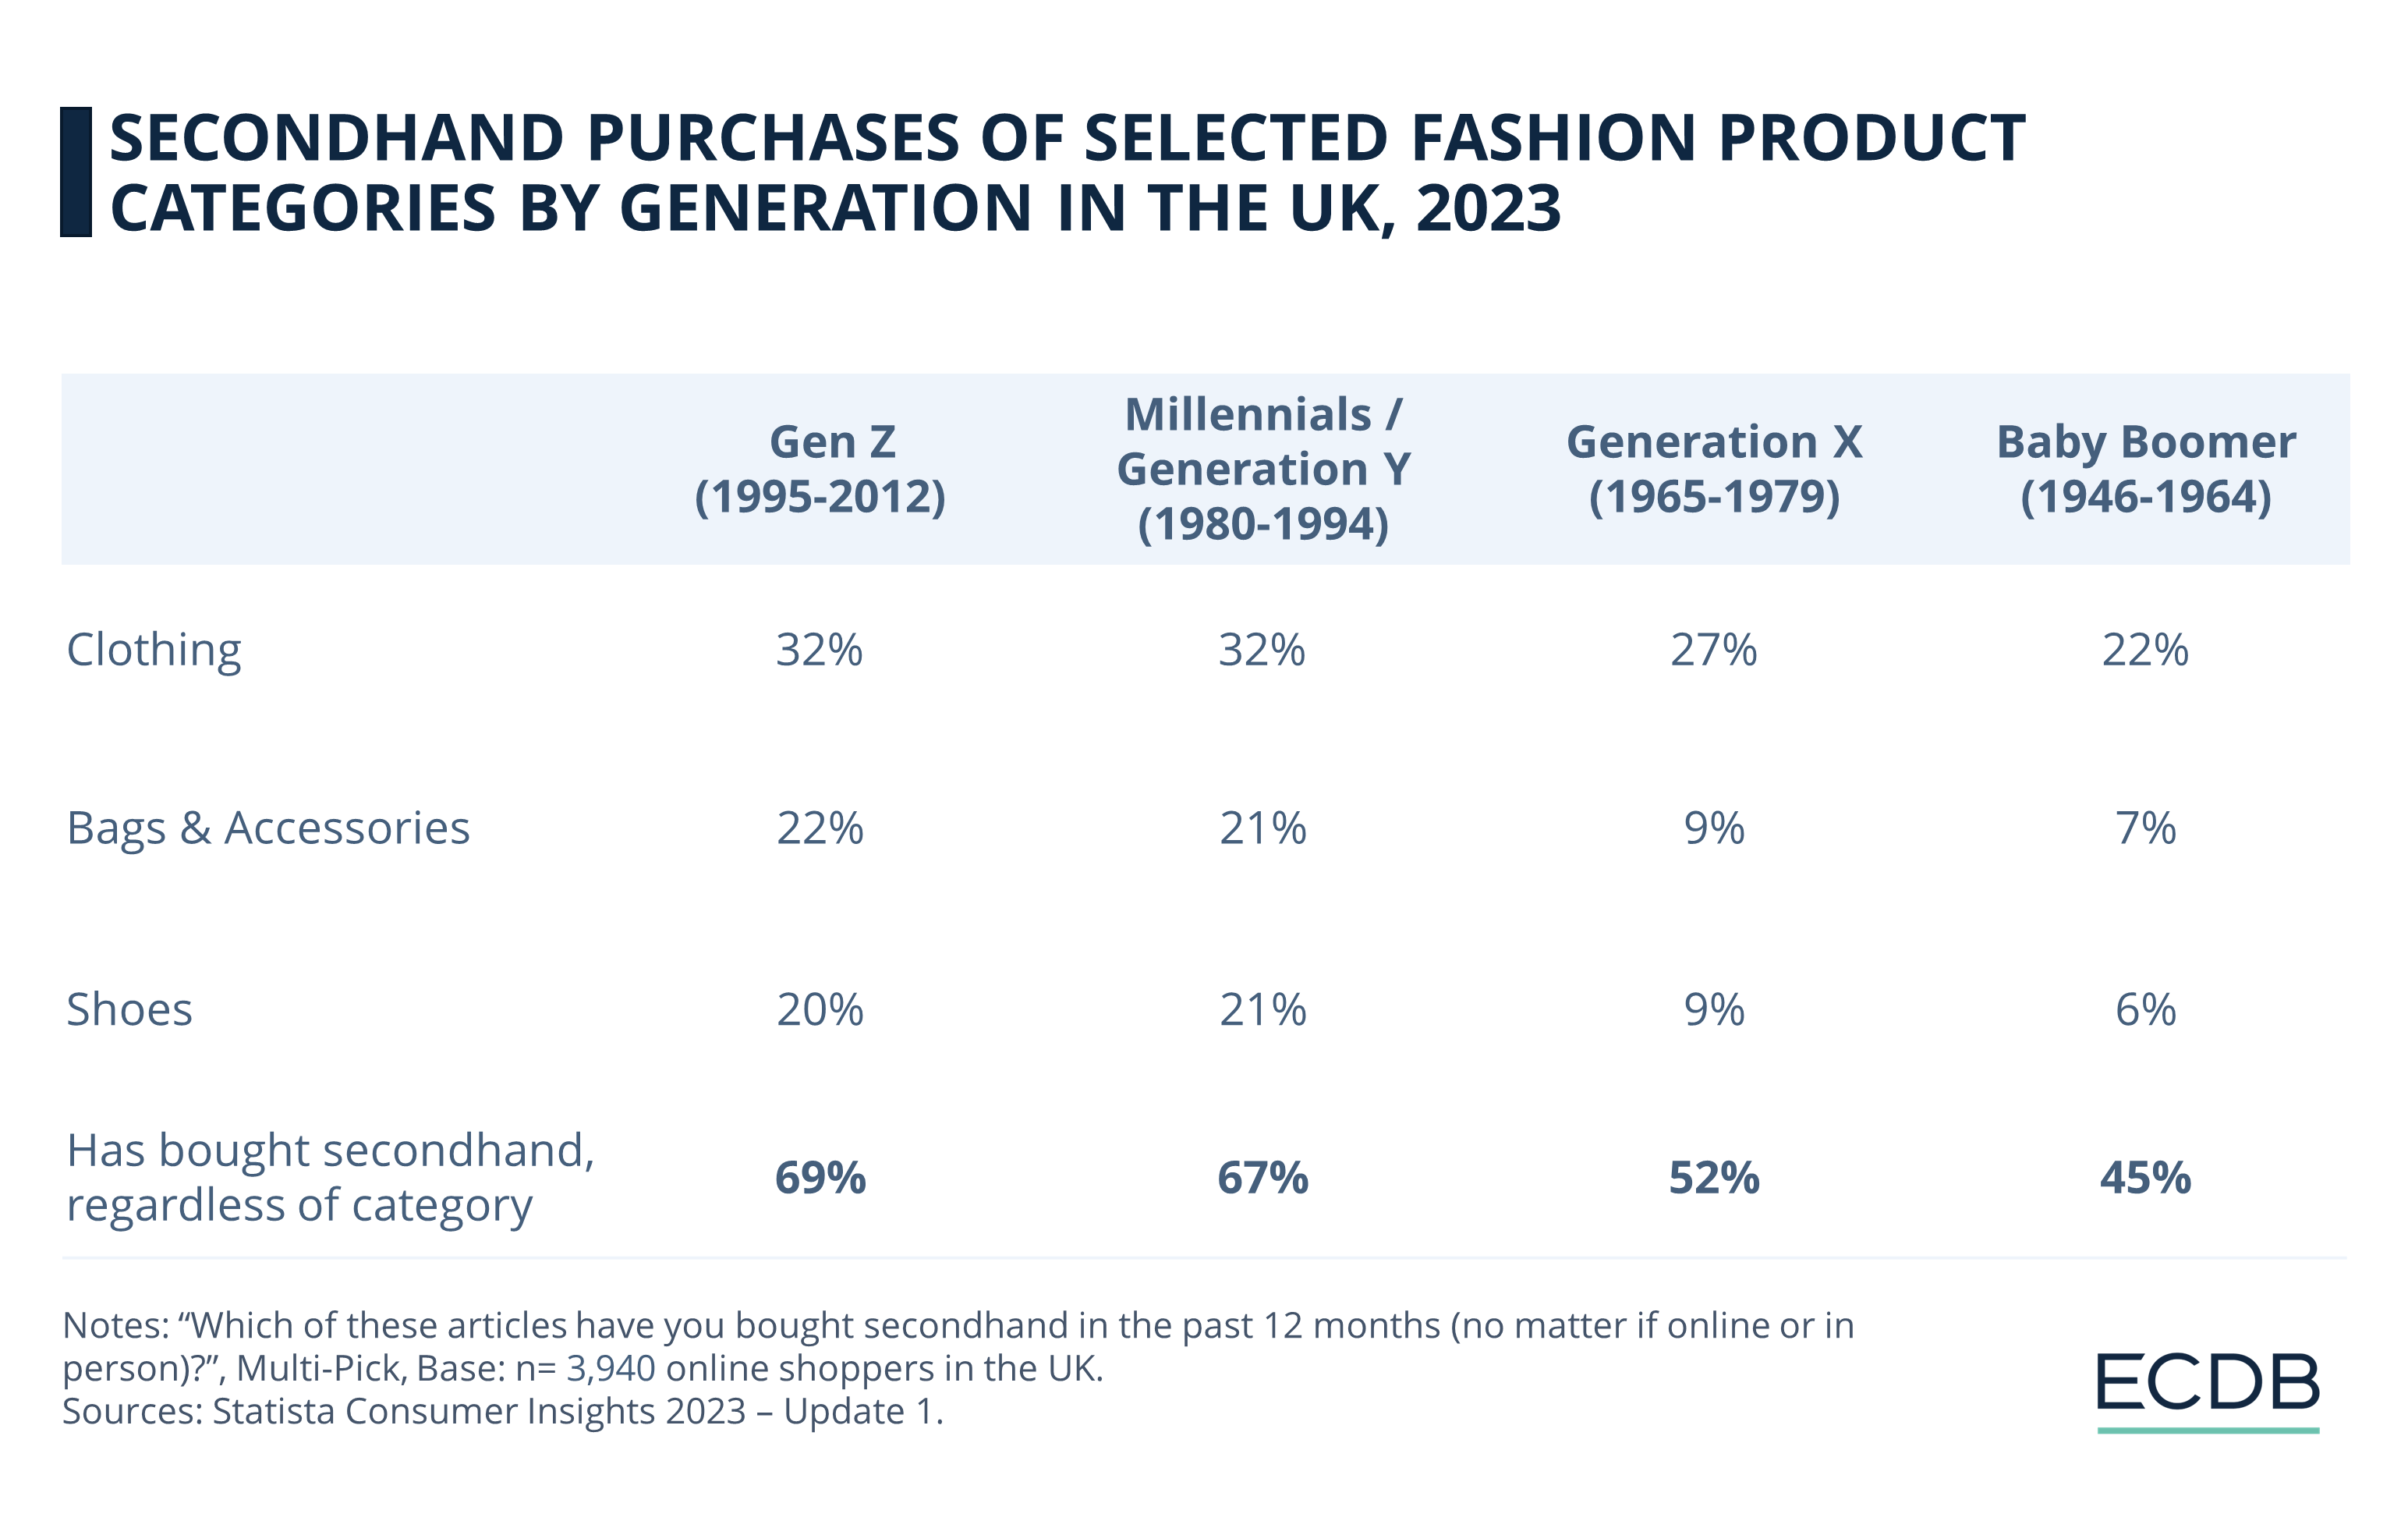 Secondhand Purchases of Selected Fashion Product Categories by Generation in the UK